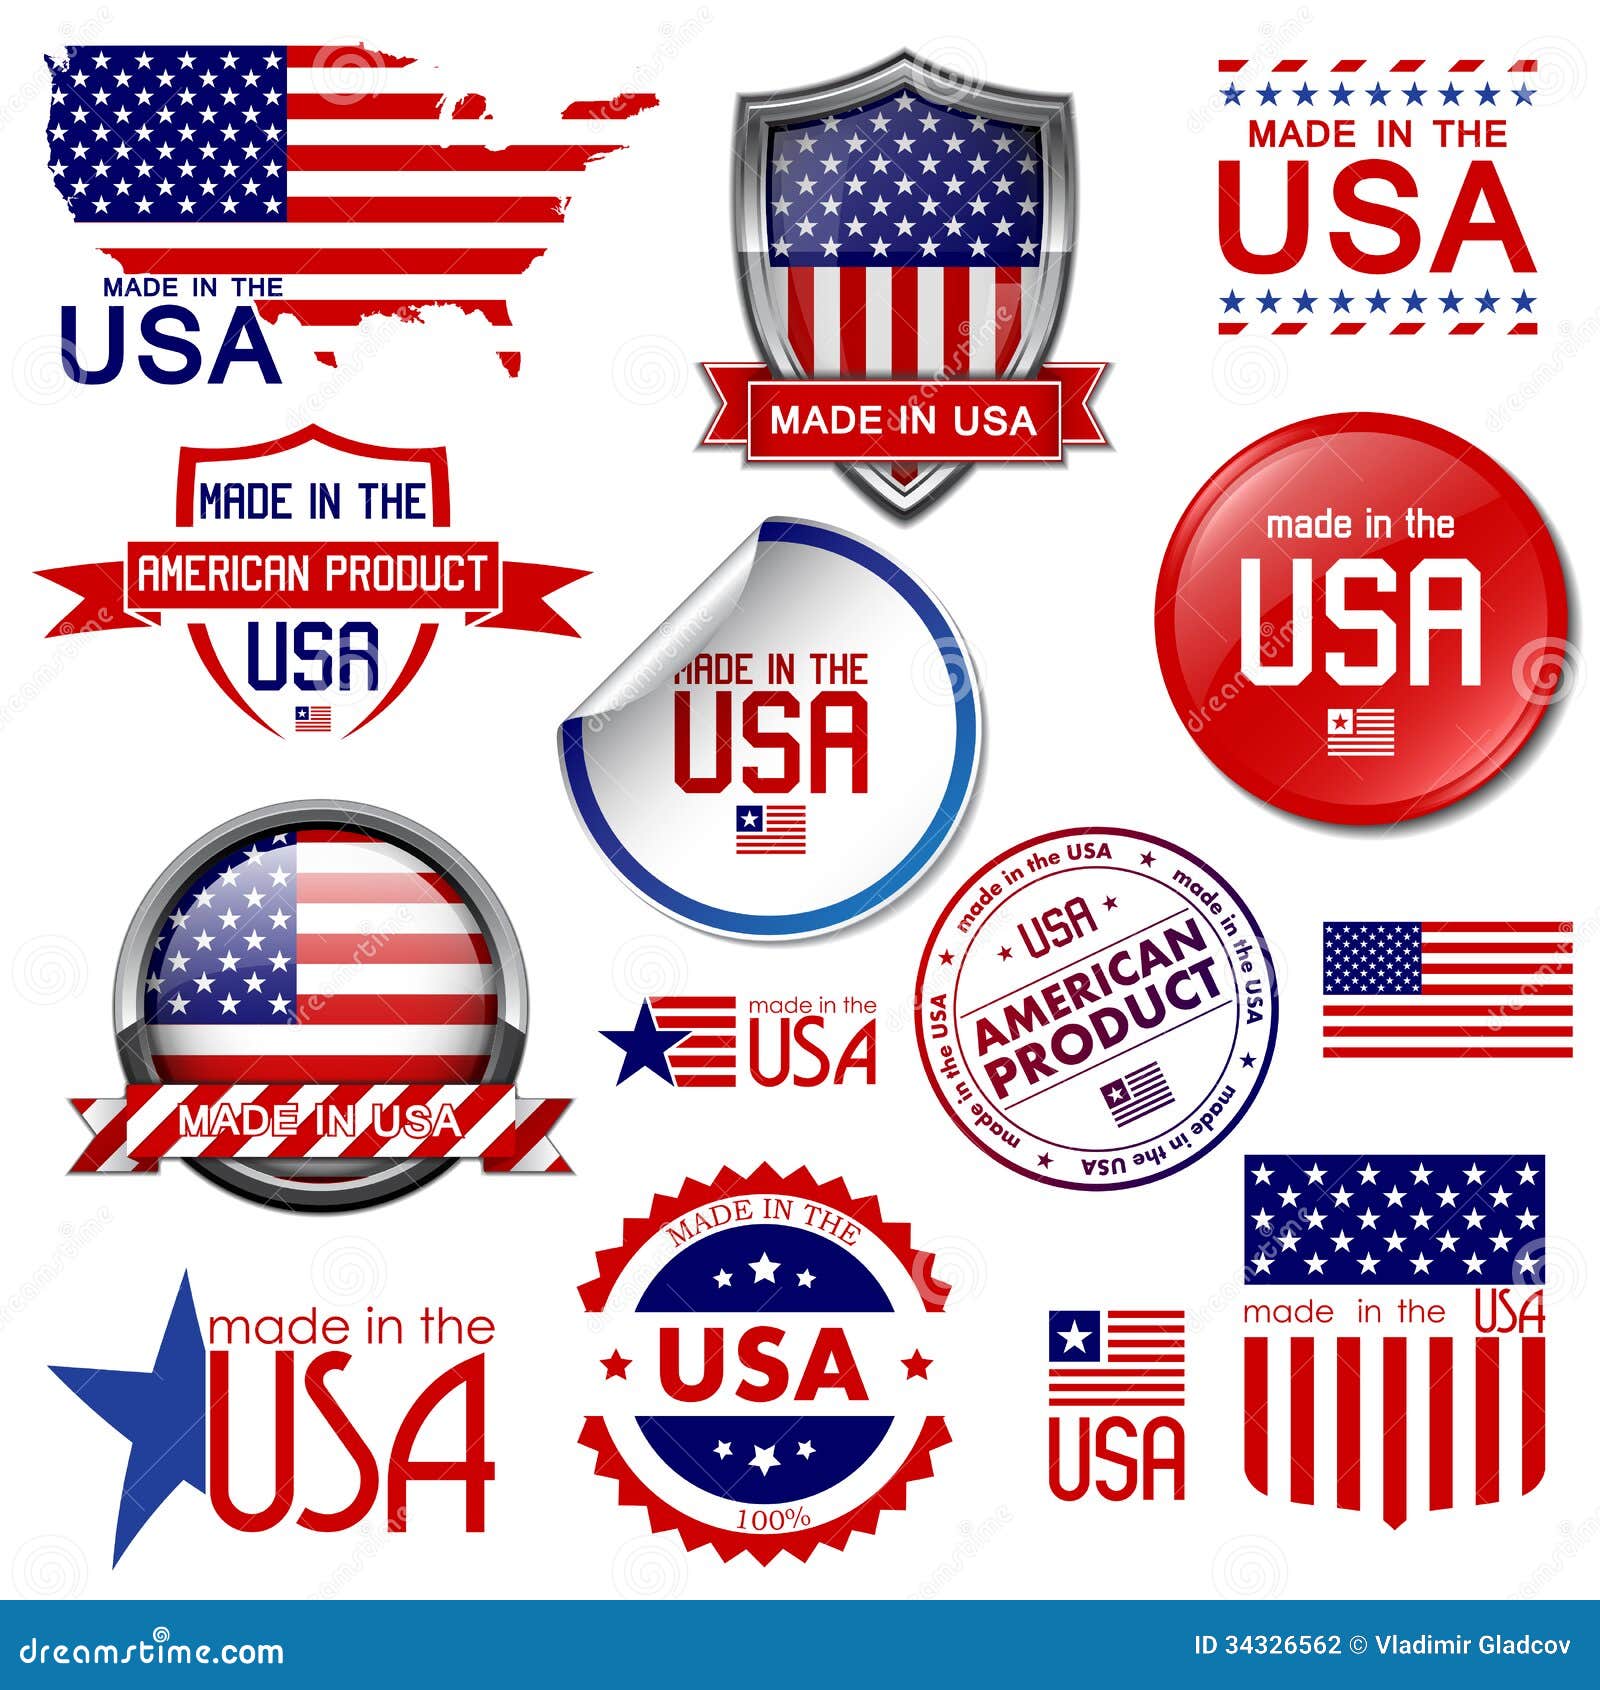 made in usa clip art free - photo #16